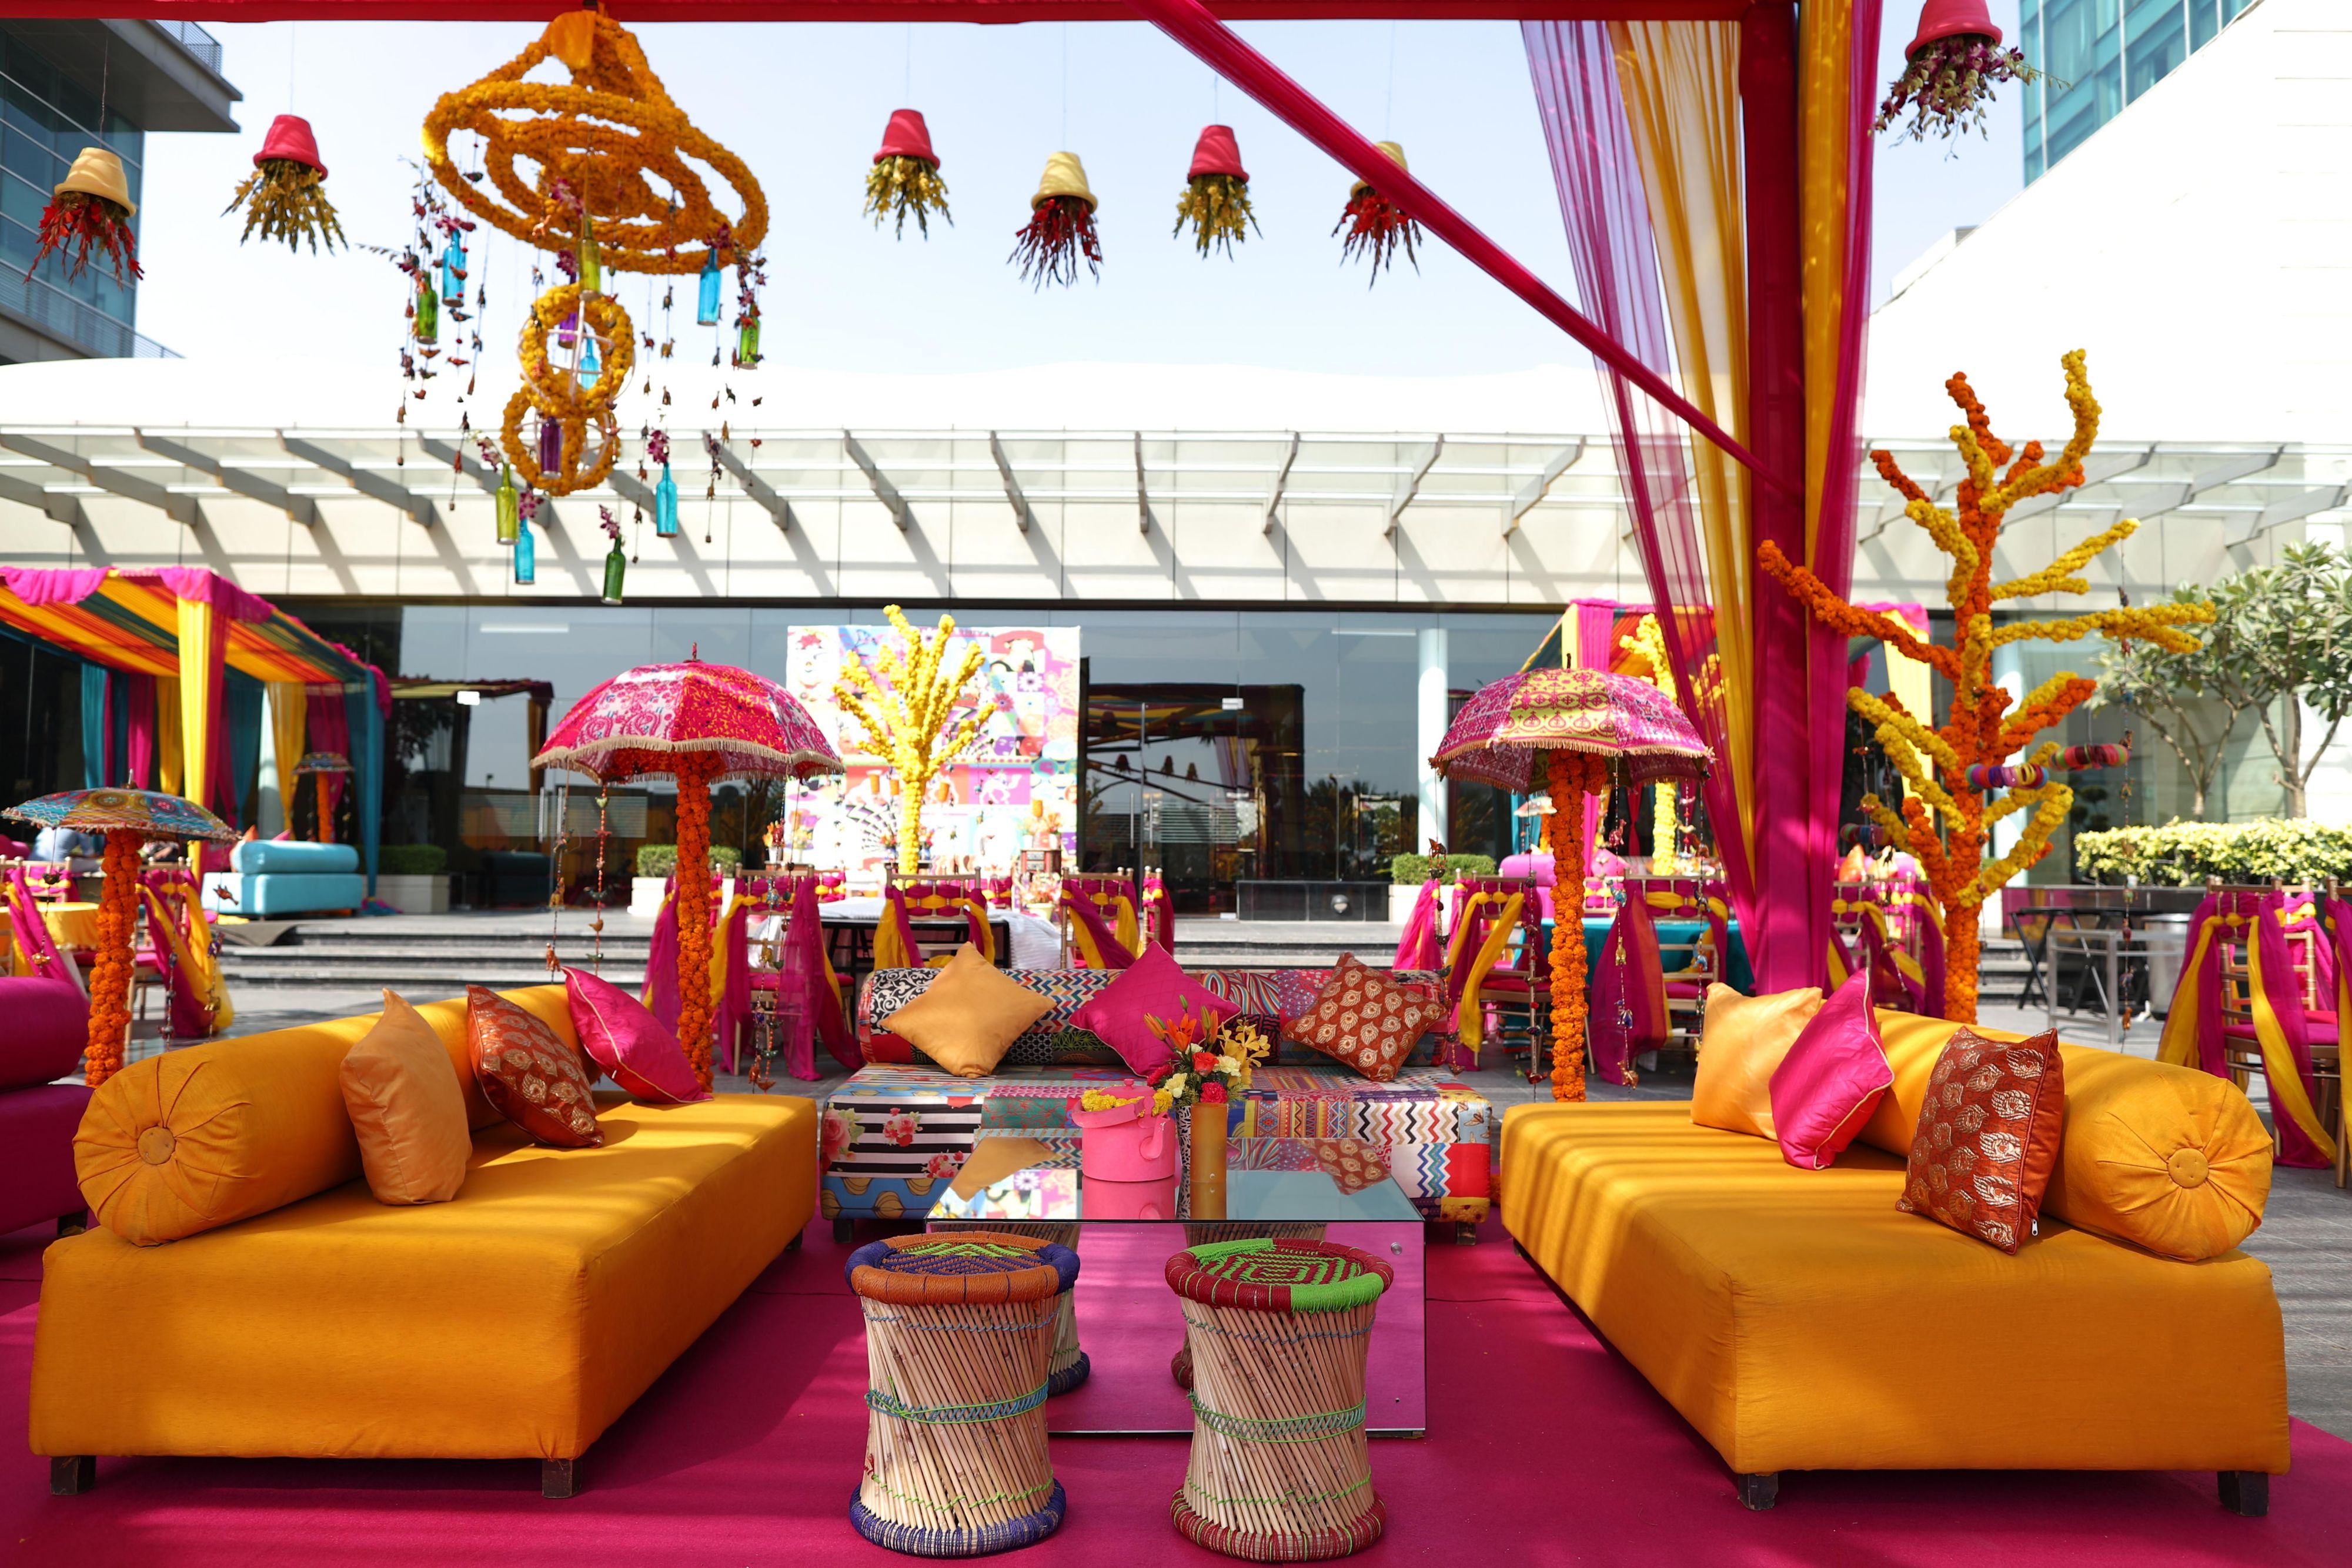 Organize your special events in the most colourful way